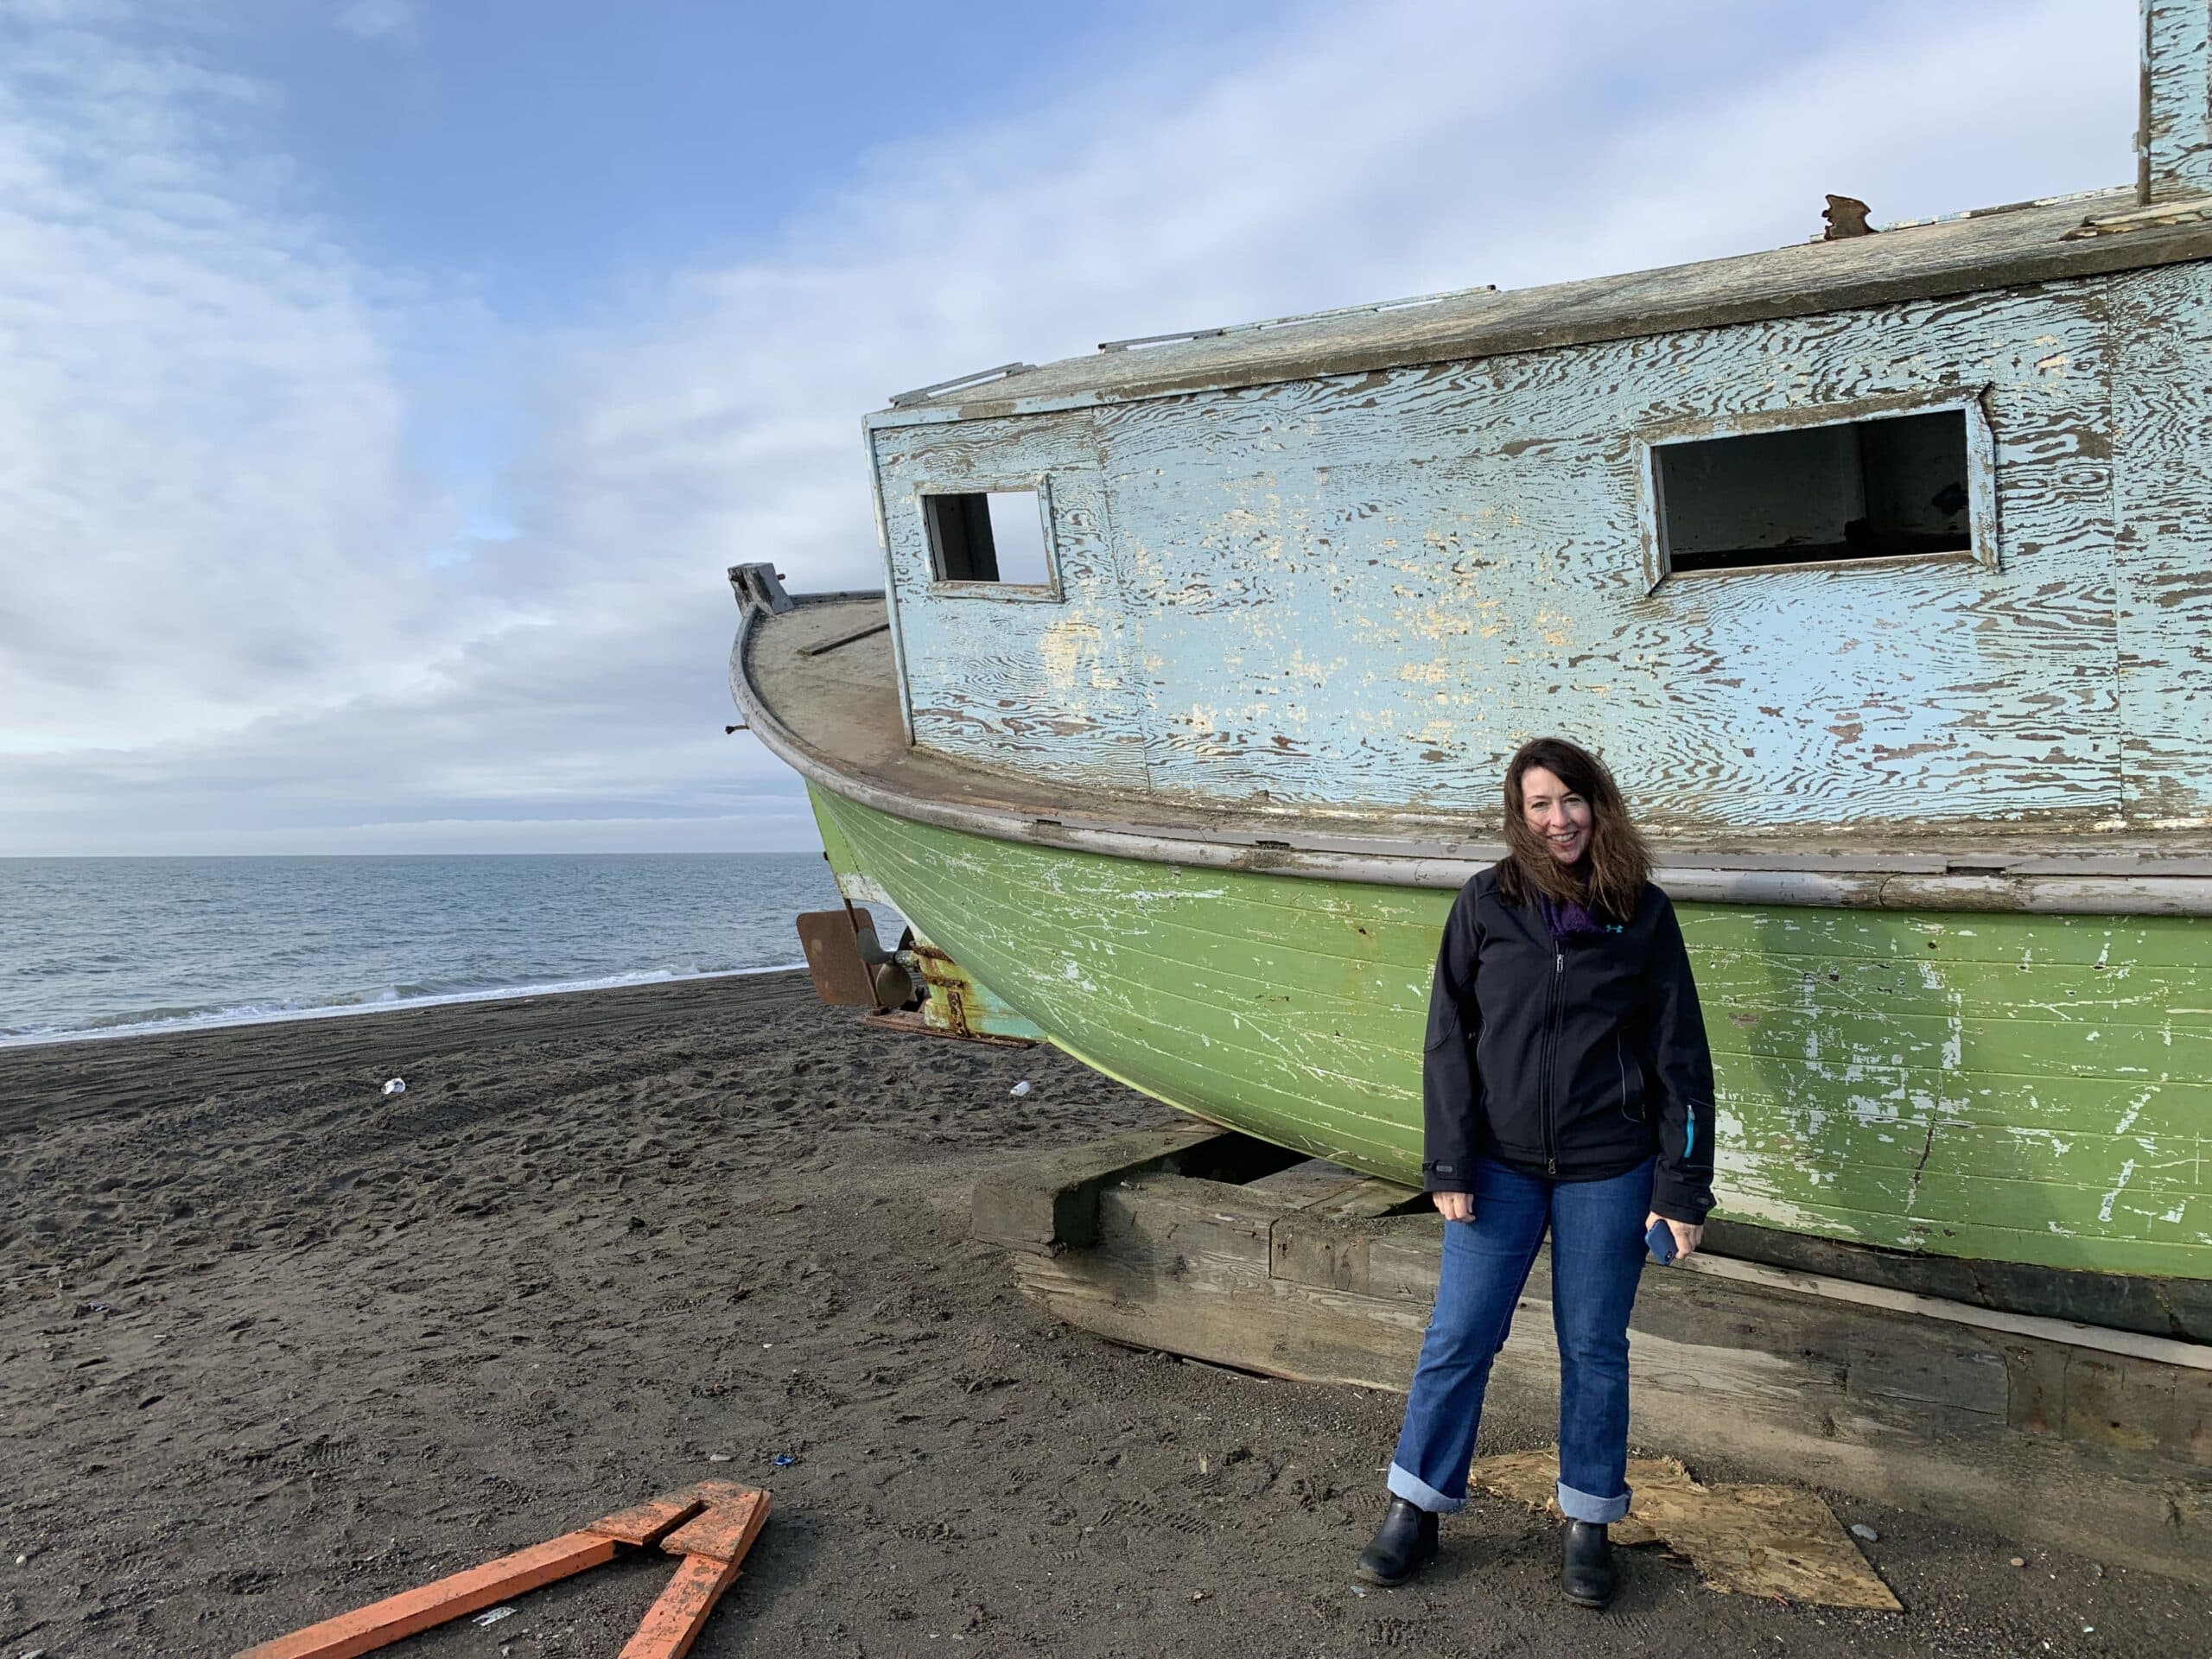 A woman with dark hair in a dark jacket and blue jeans stands in front of a blue and green fishing boat in front of a blue sky